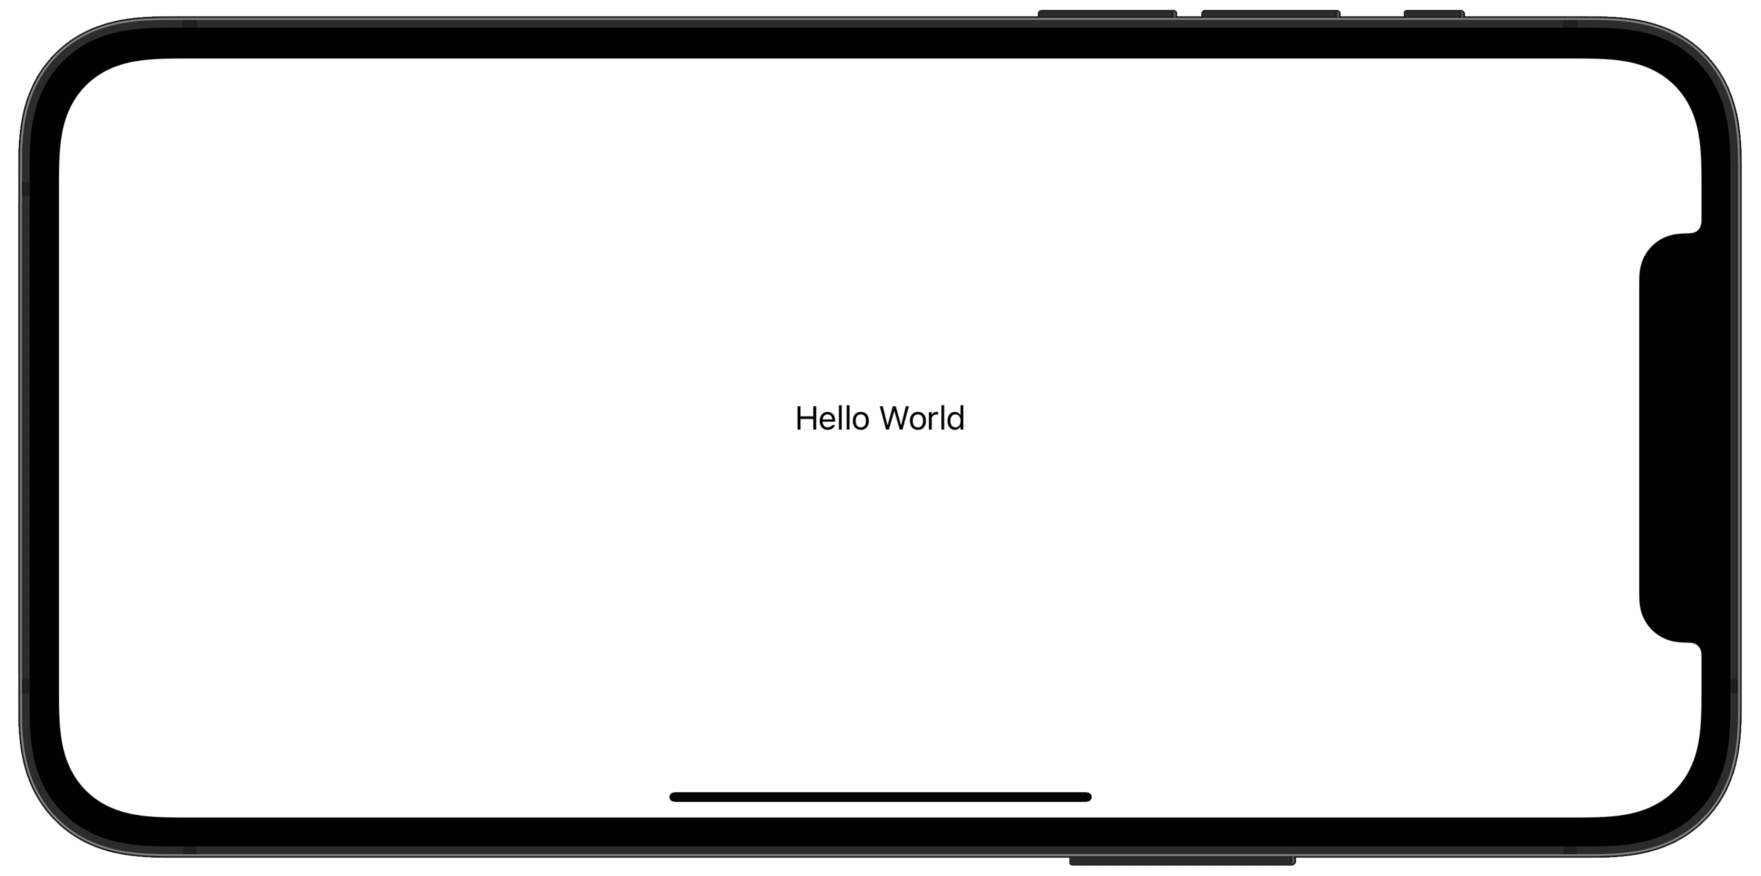 A phone with the text “Hello World” in the center of the screen.